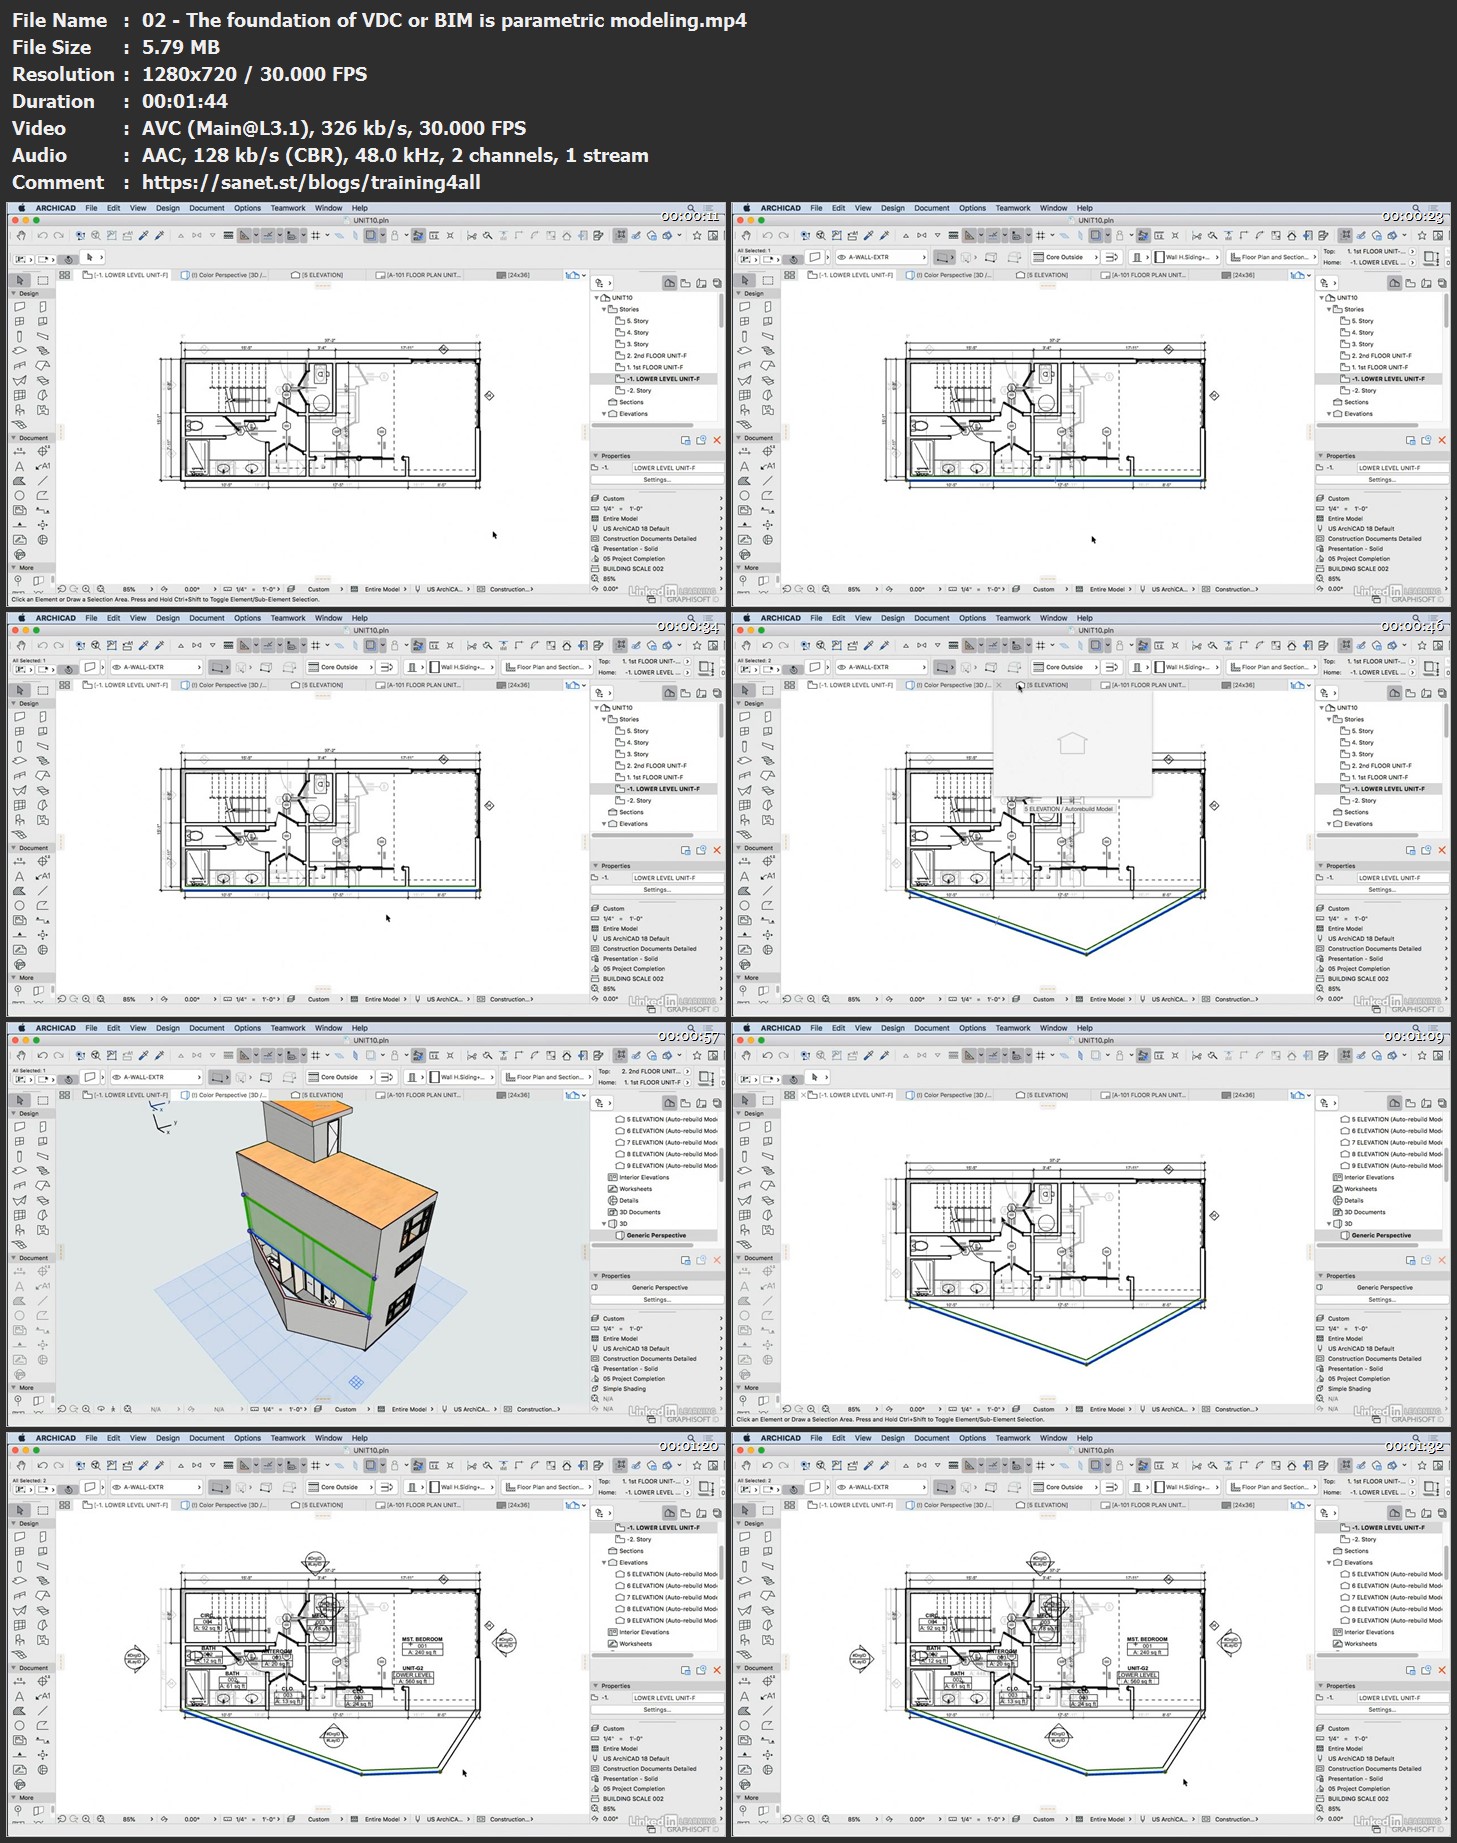 eptar reinforcement for archicad 23